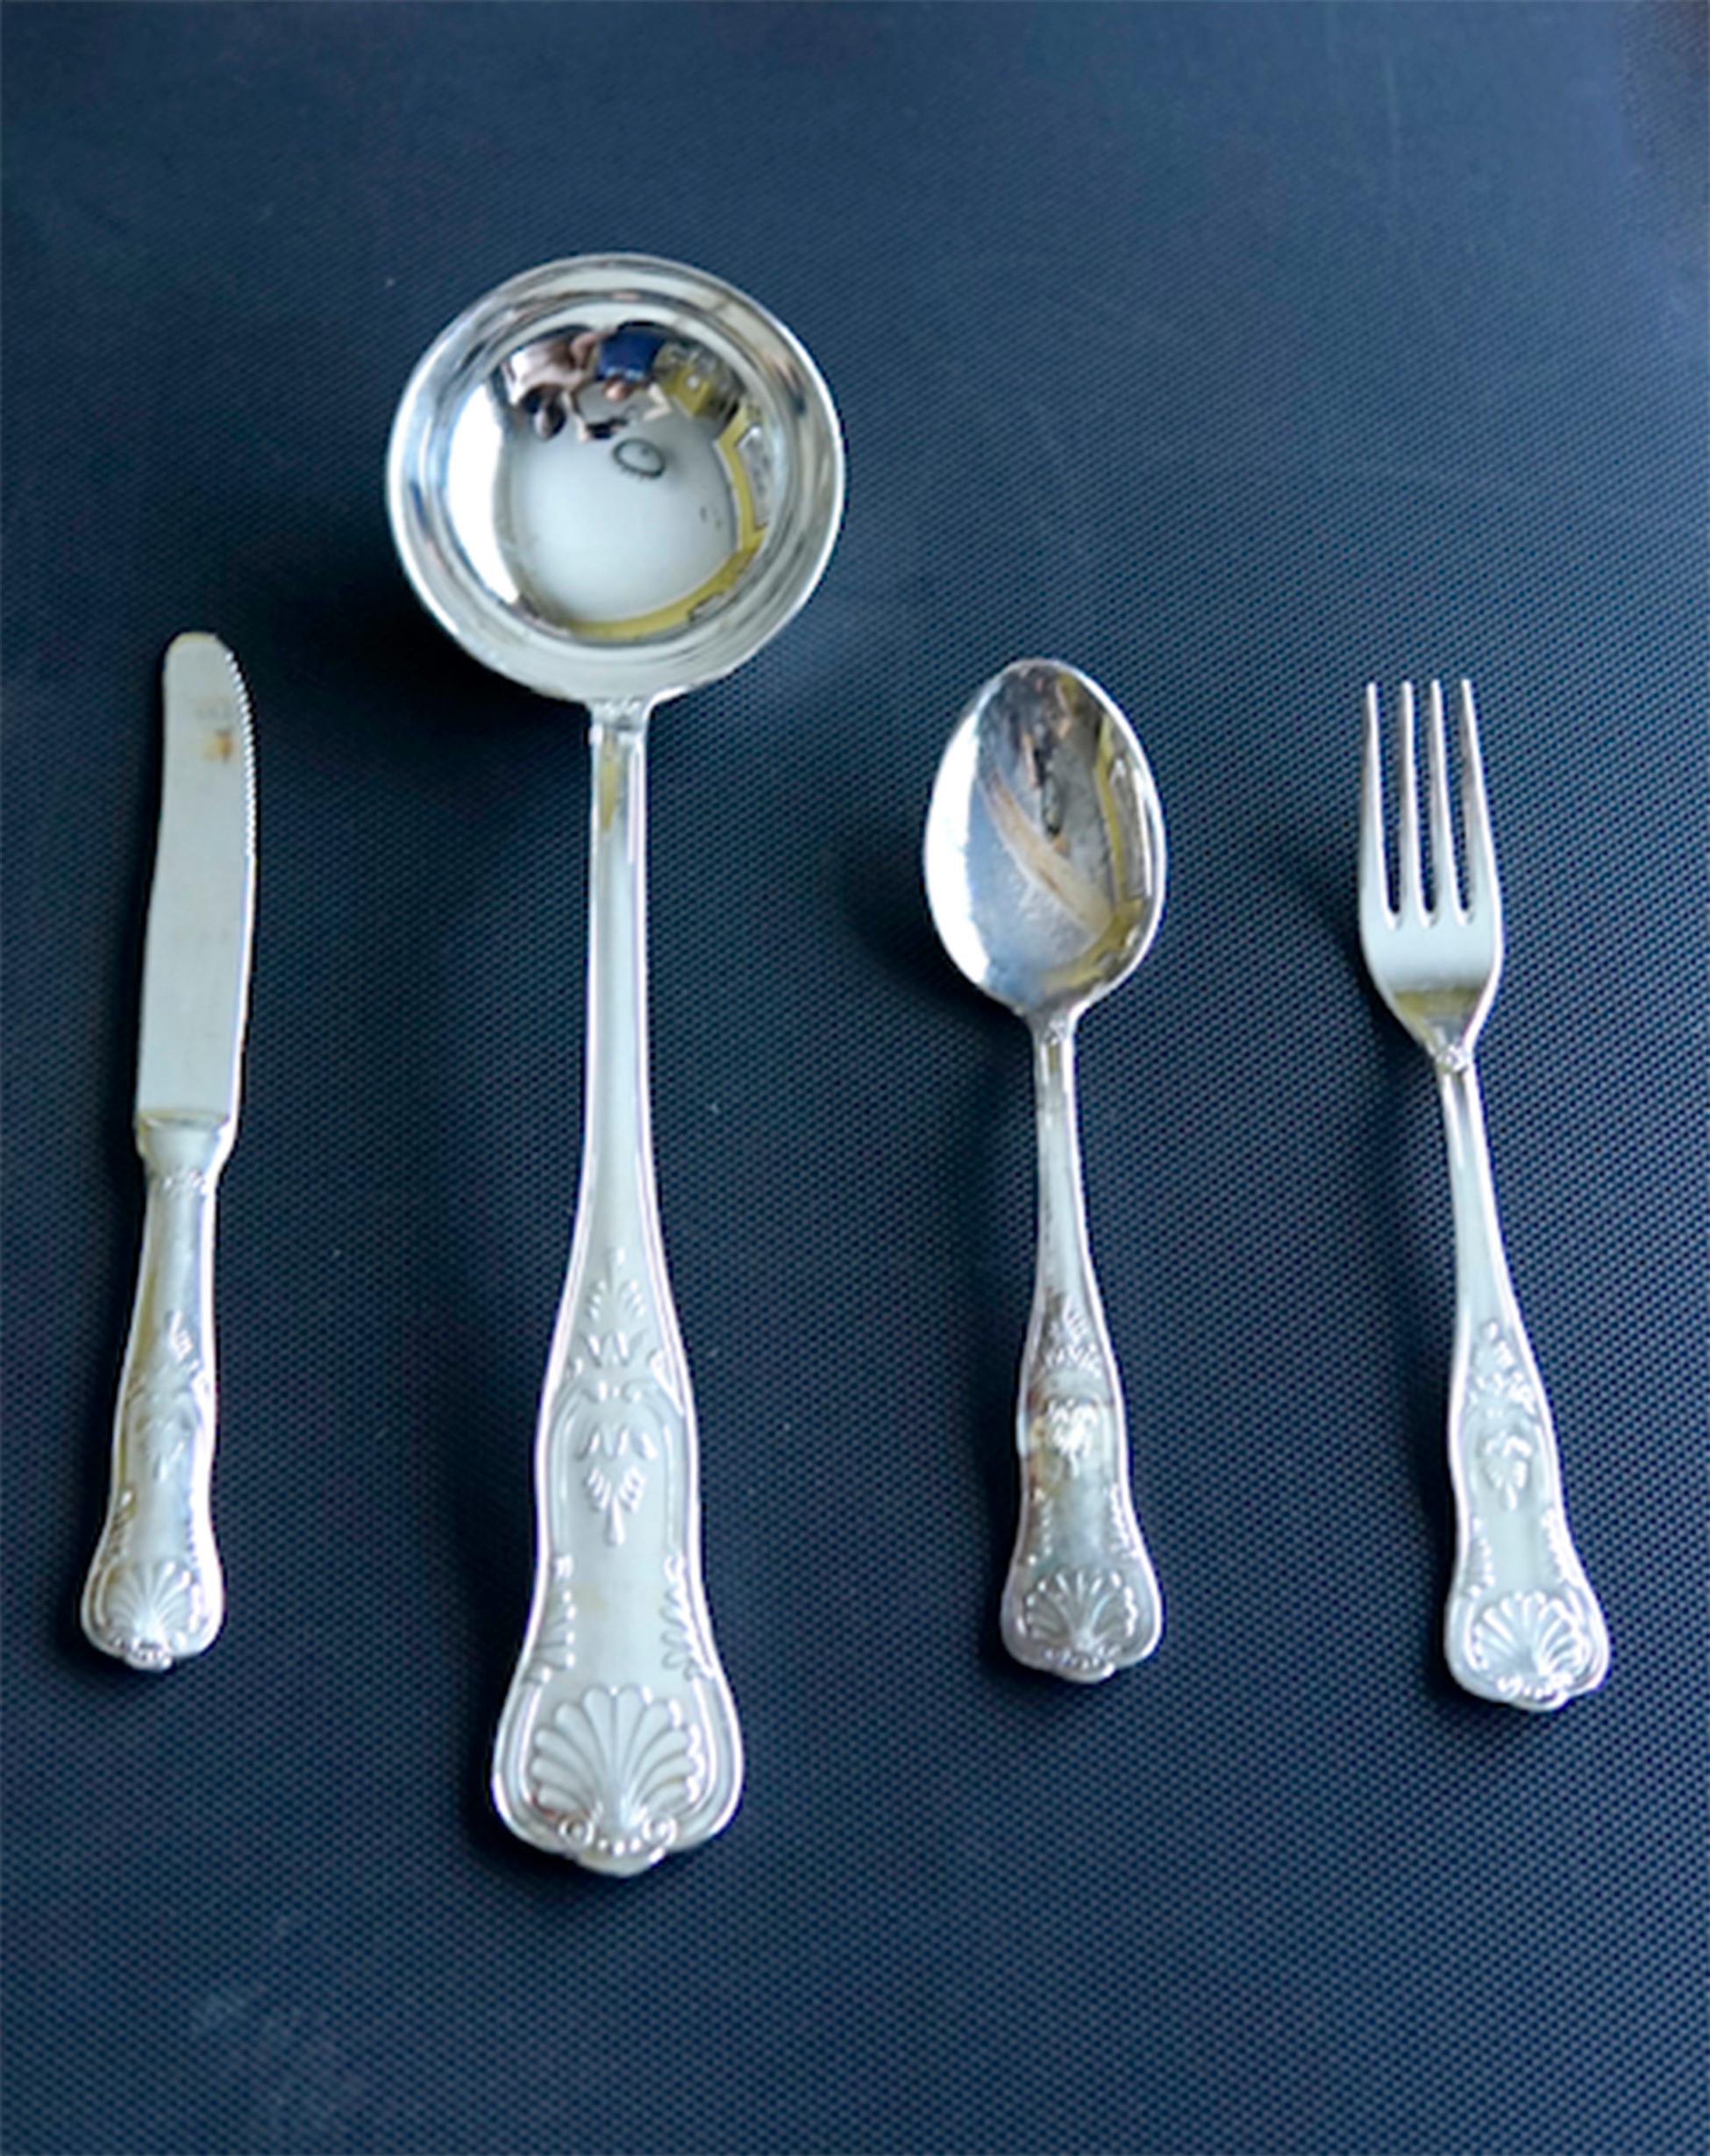 This is a beautiful set of silver plate silverware from the Italian province of Ascoli Piceno. It is a wonderful vintage 39-piece Italian silverplated flatware part dinner service, made by an unattributed silversmith in Ascoli Piceno, Italy, mid